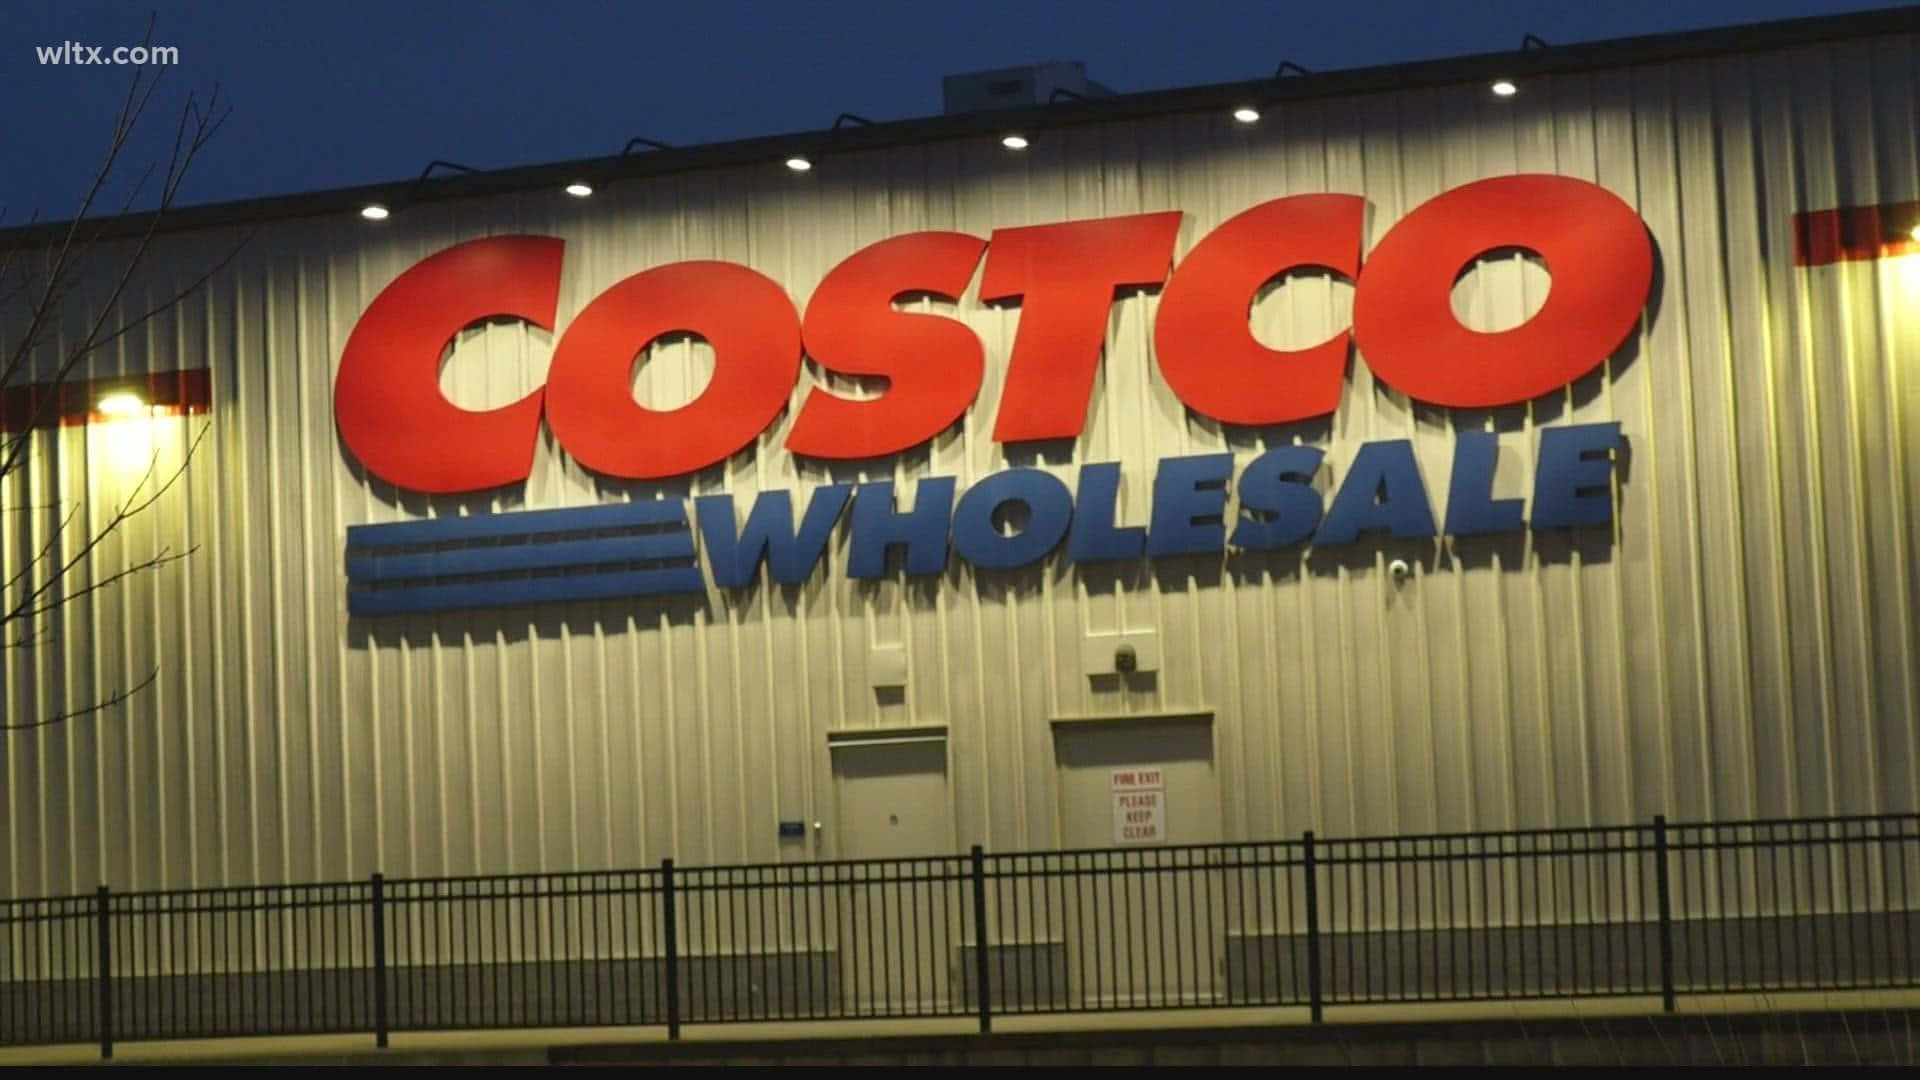 Costco Wholesale Sign At Night